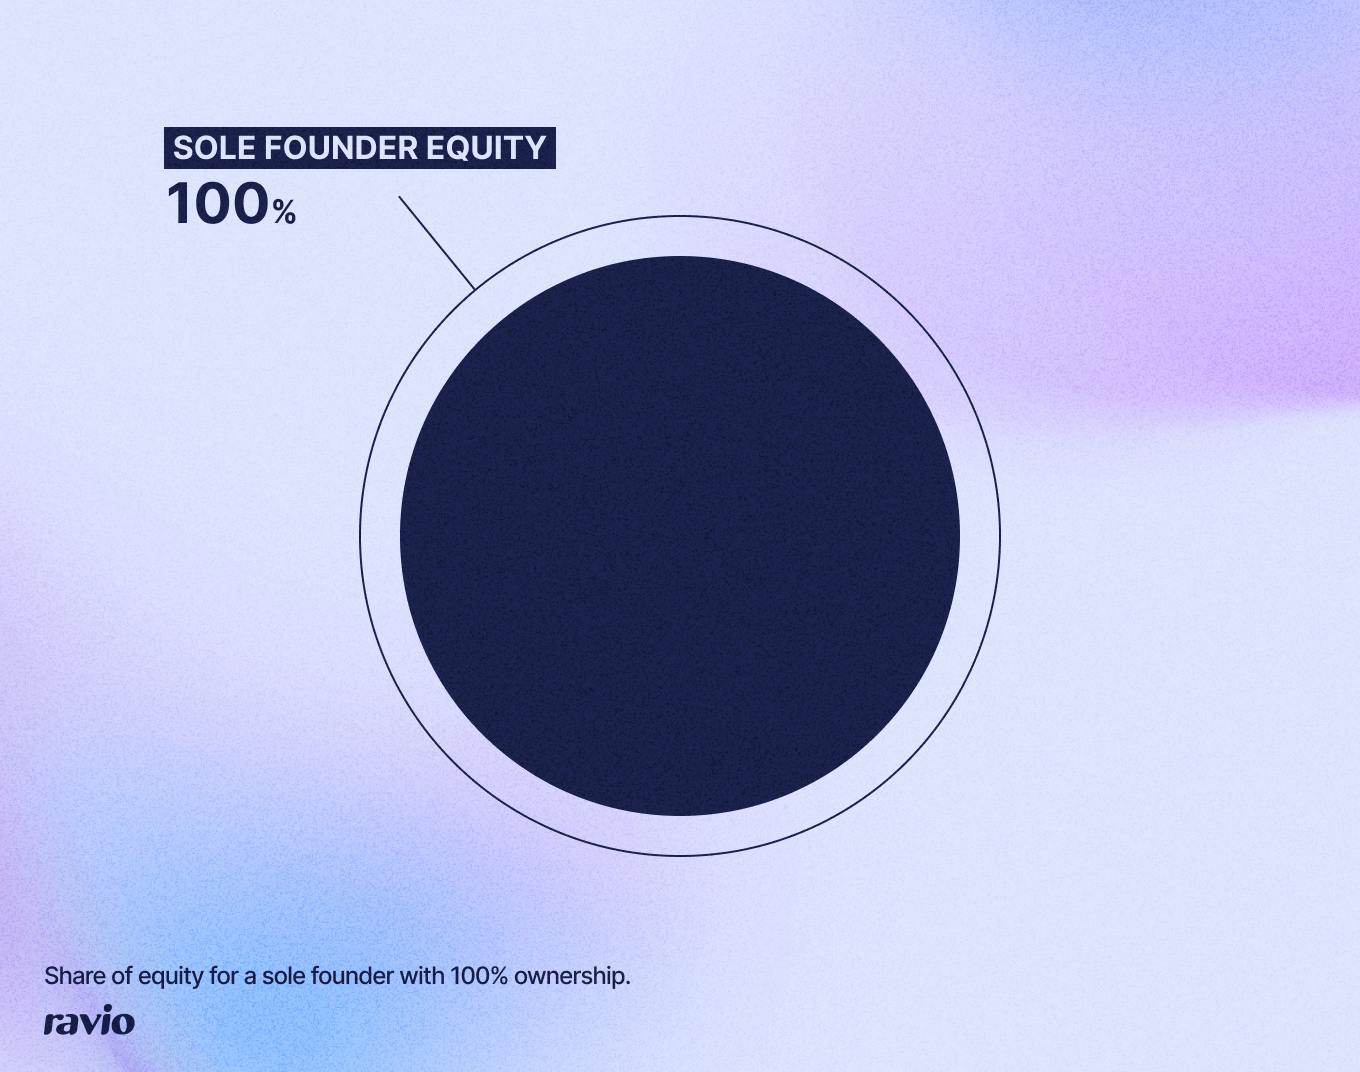 Pie chart showing 100% of equity owned by a sole founder